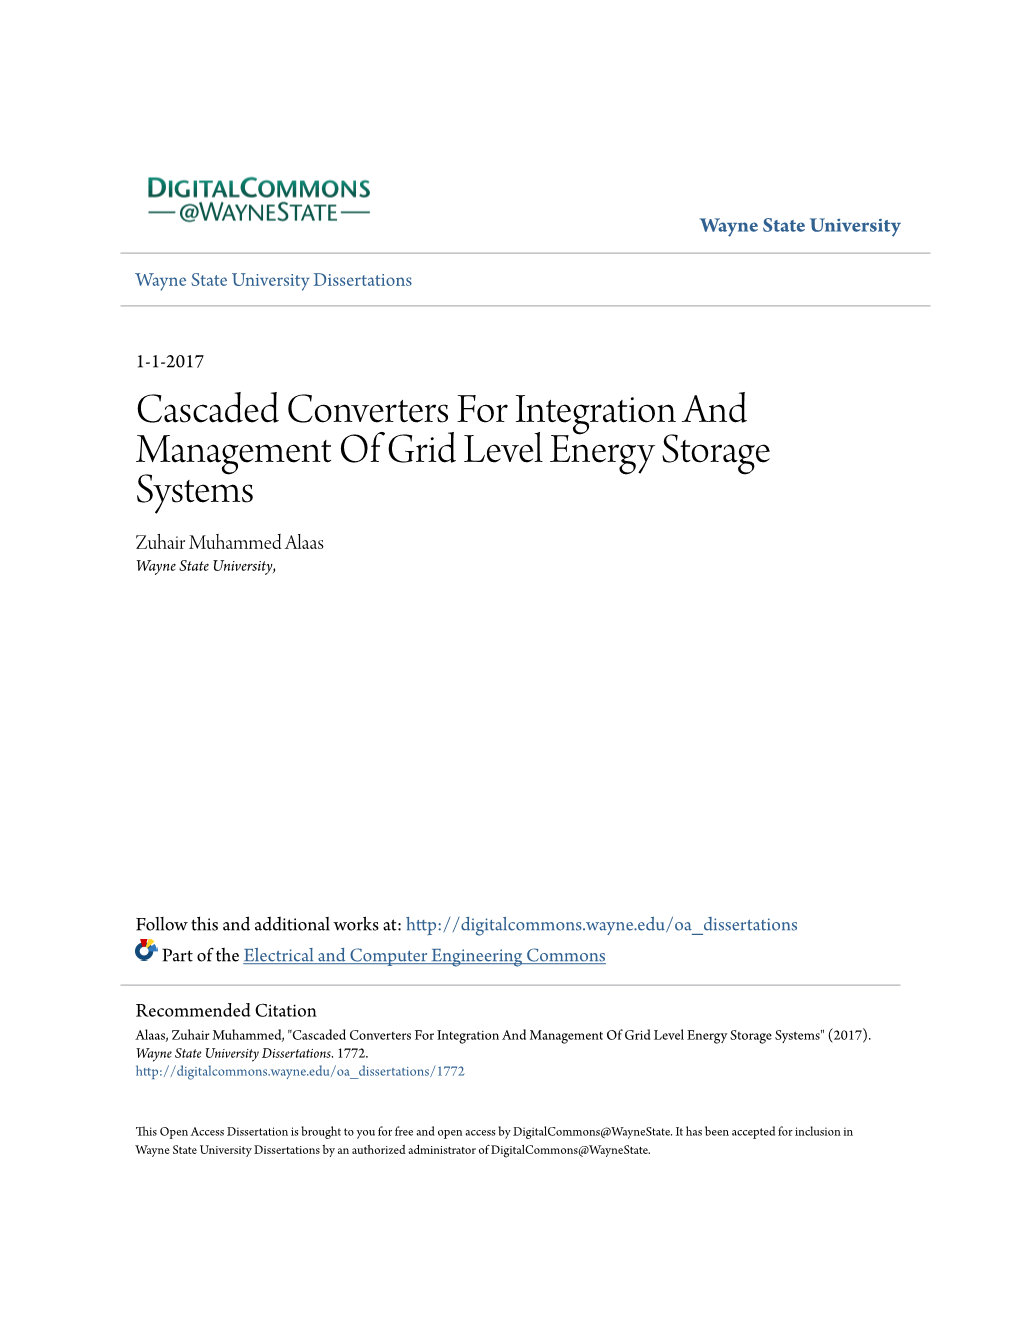 Cascaded Converters for Integration and Management of Grid Level Energy Storage Systems Zuhair Muhammed Alaas Wayne State University